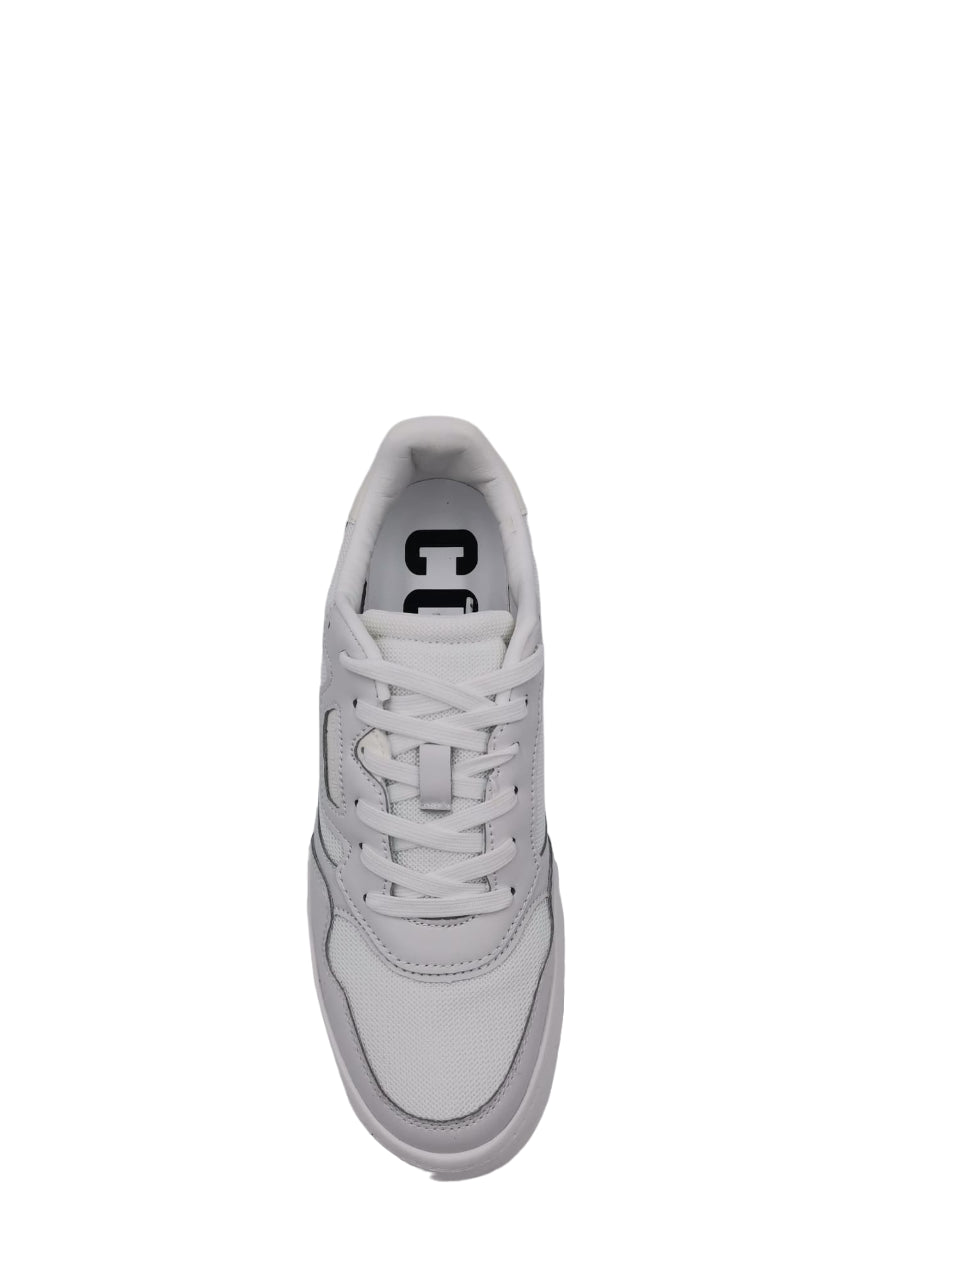 Sneakers D.Franklin Uomo Court Basic Bianco